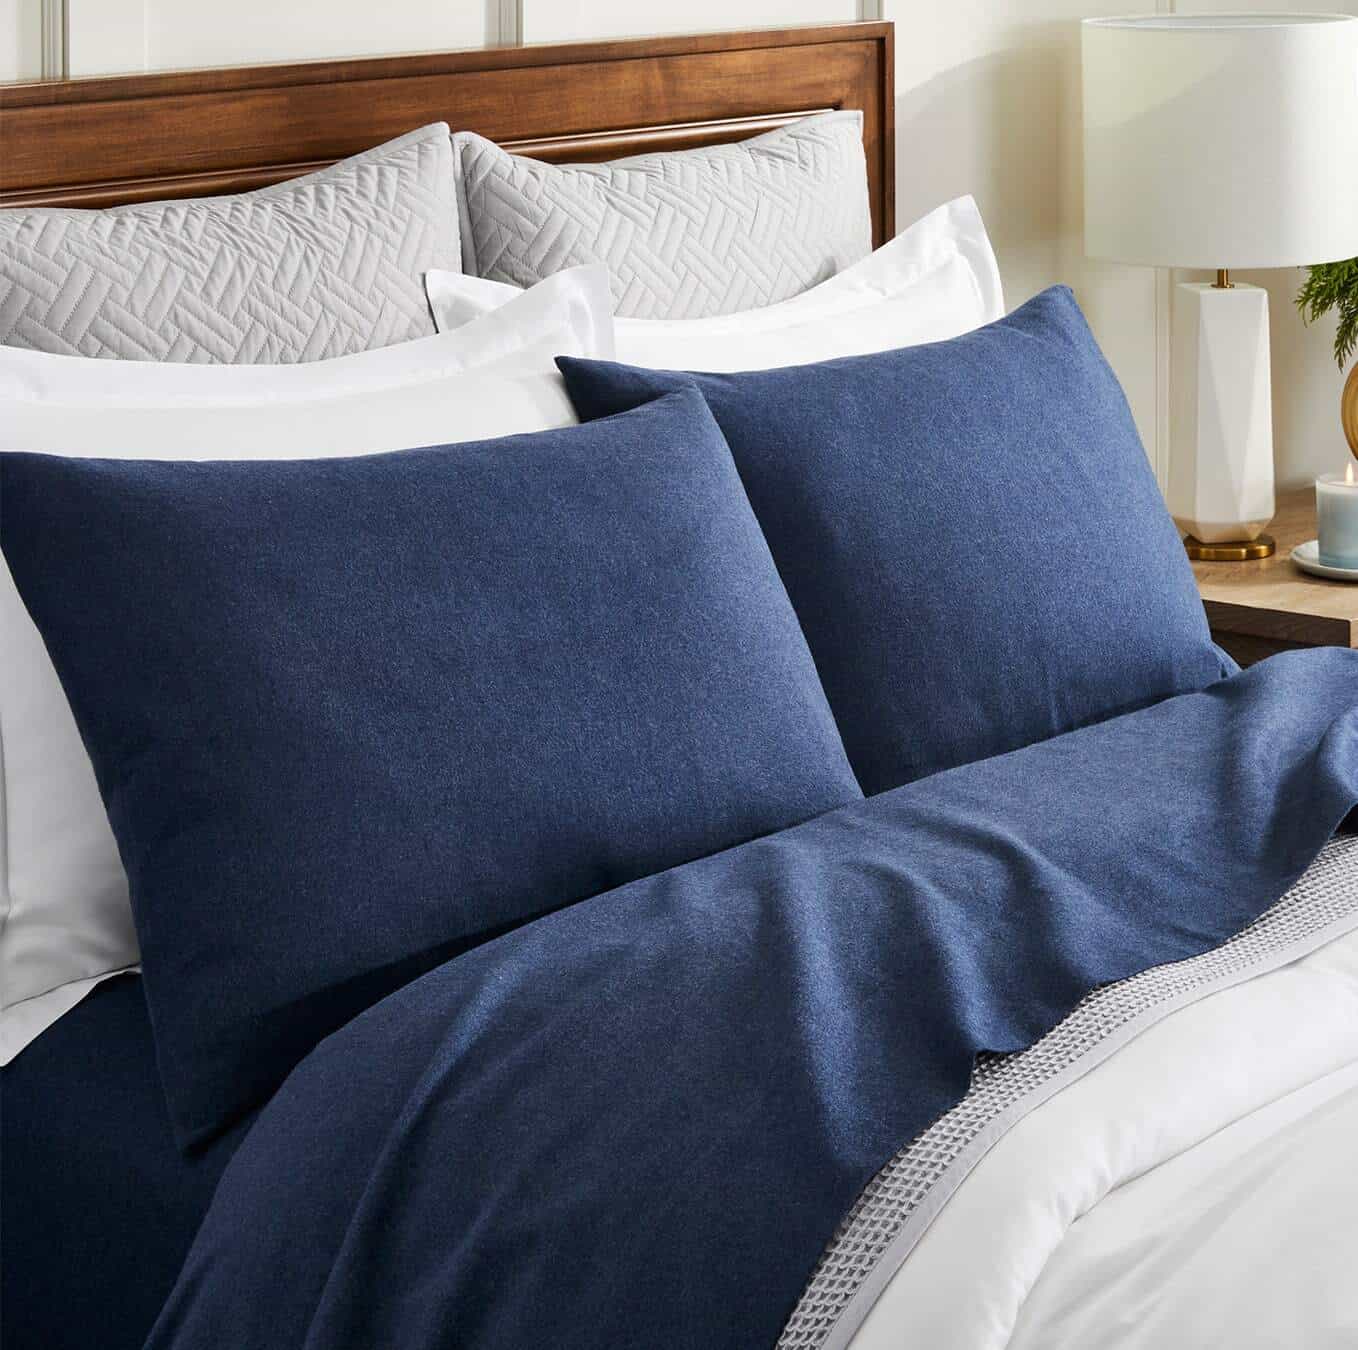 Navy Flannel Brings A Chic Touch To Your Gray Comforter